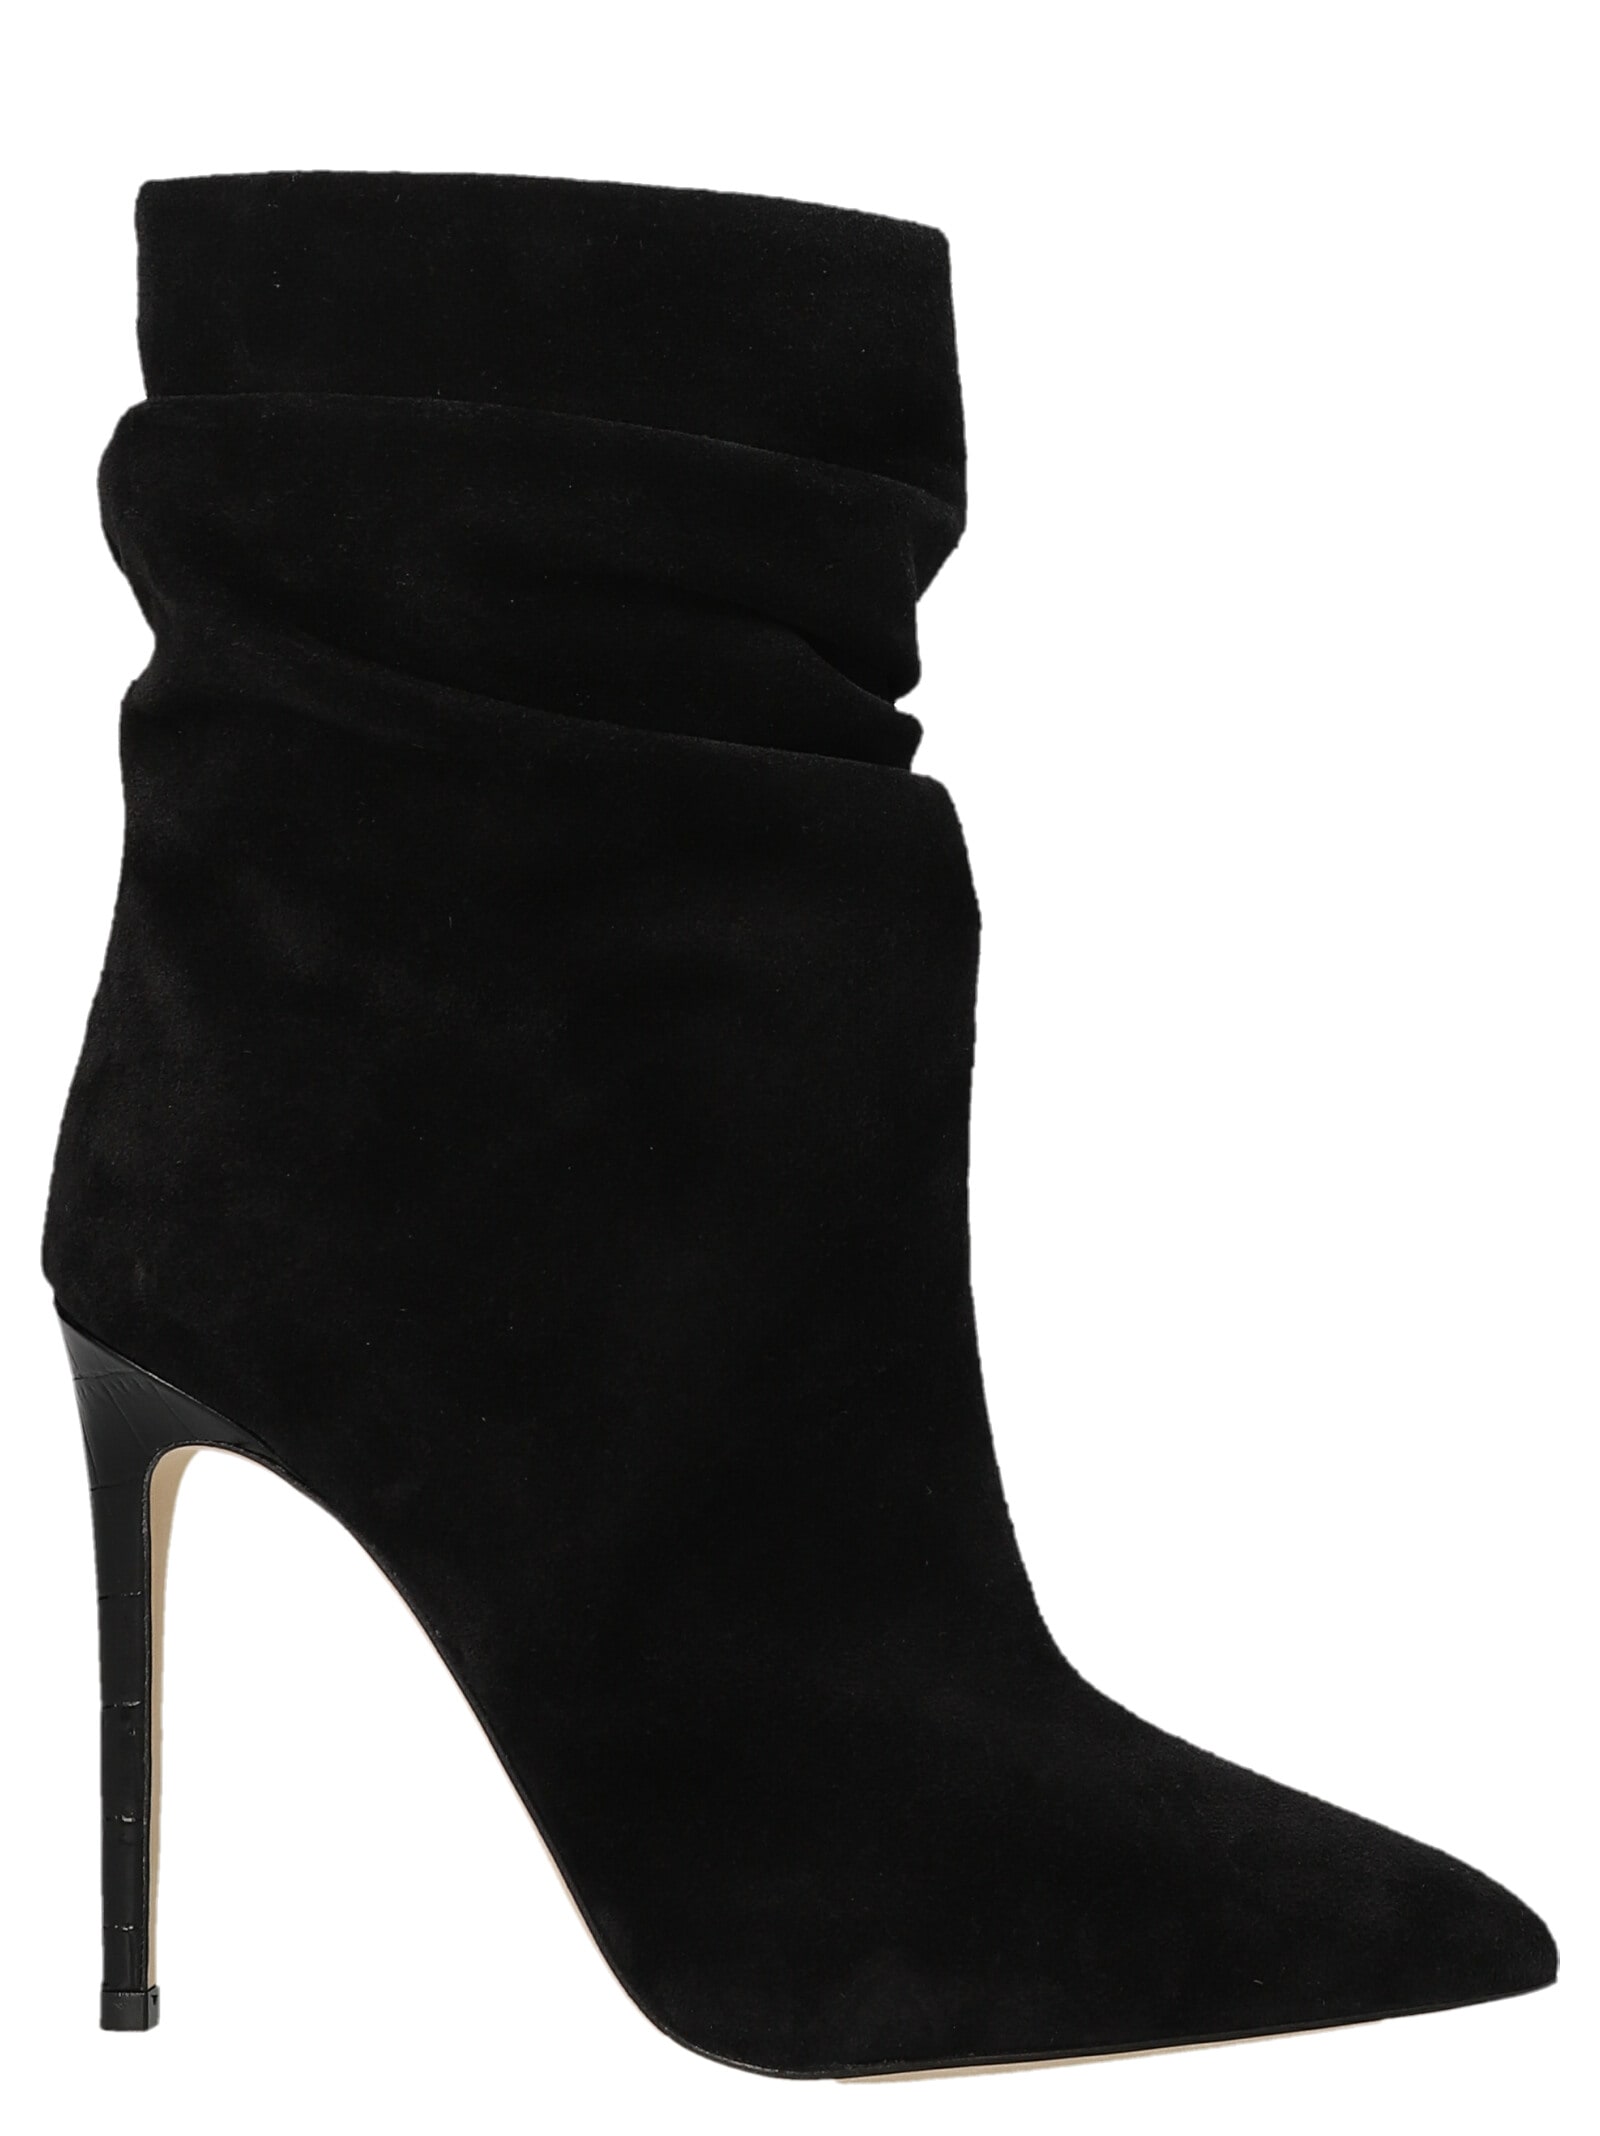 Paris Texas slouchy Ankle Boot Ankle Boots